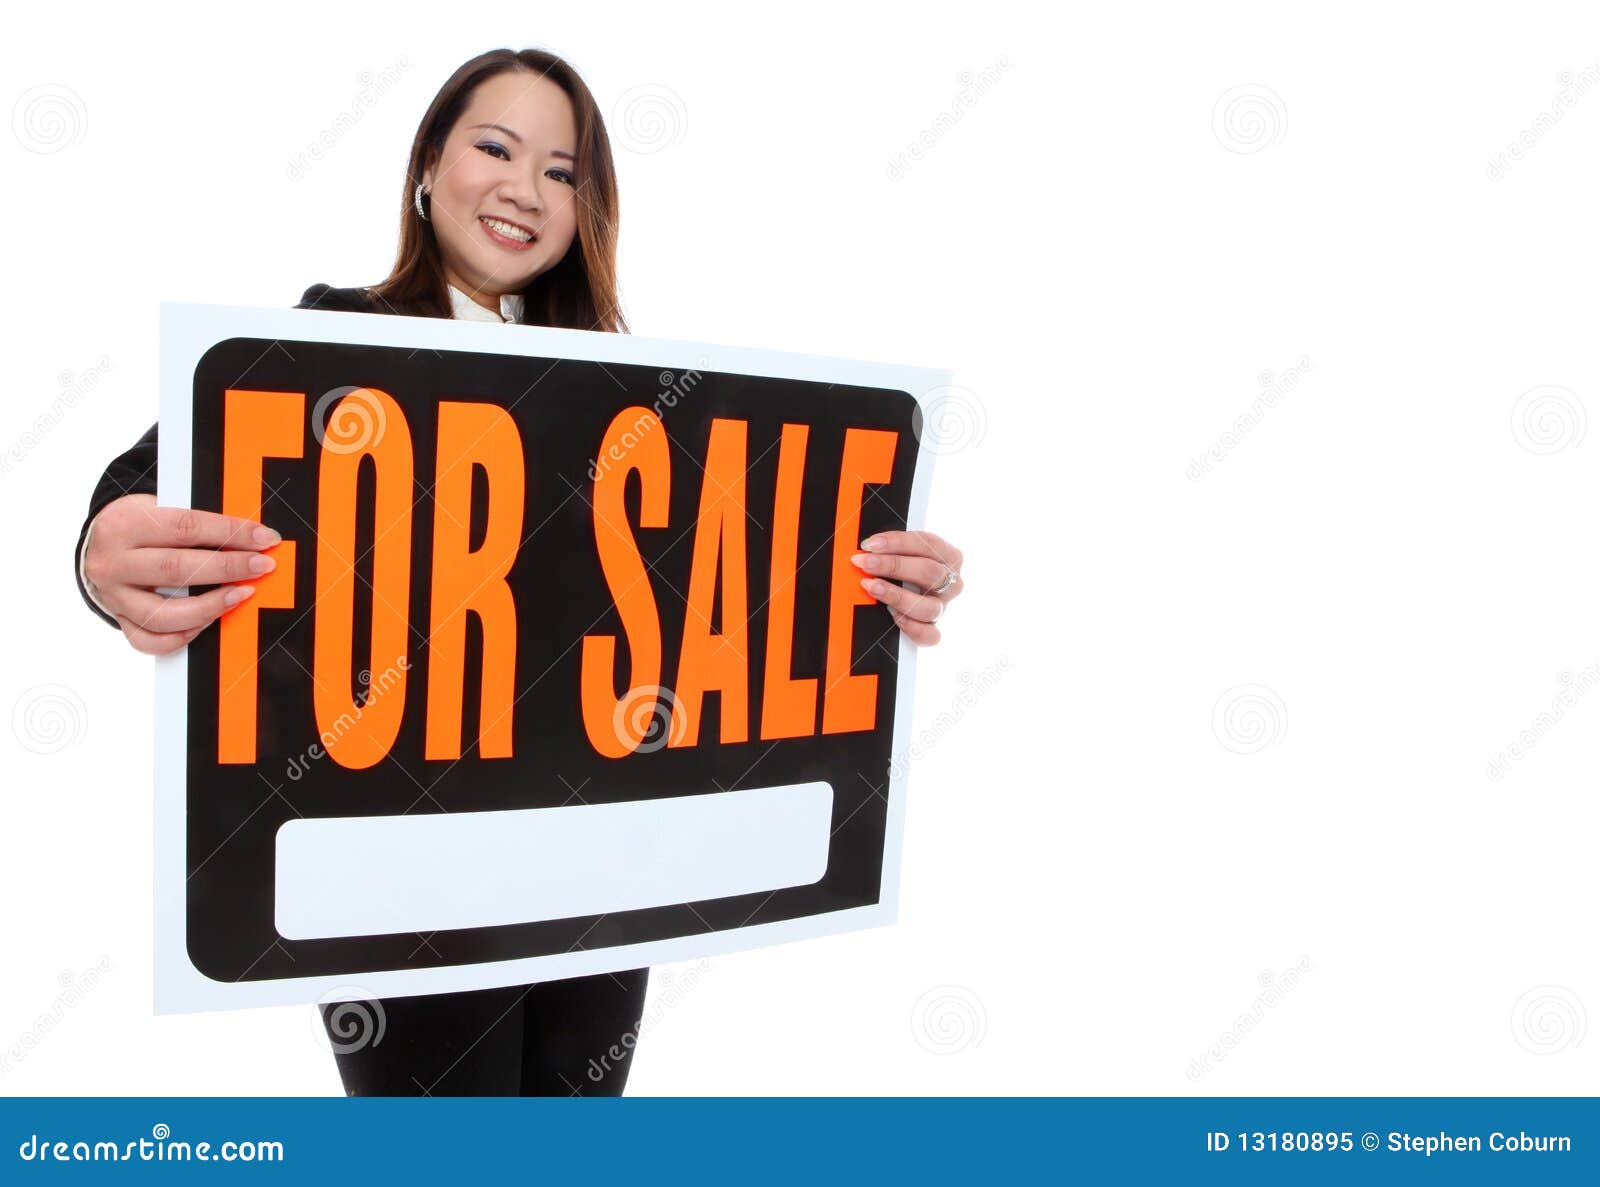 Title Asian Woman Holding Sale 70